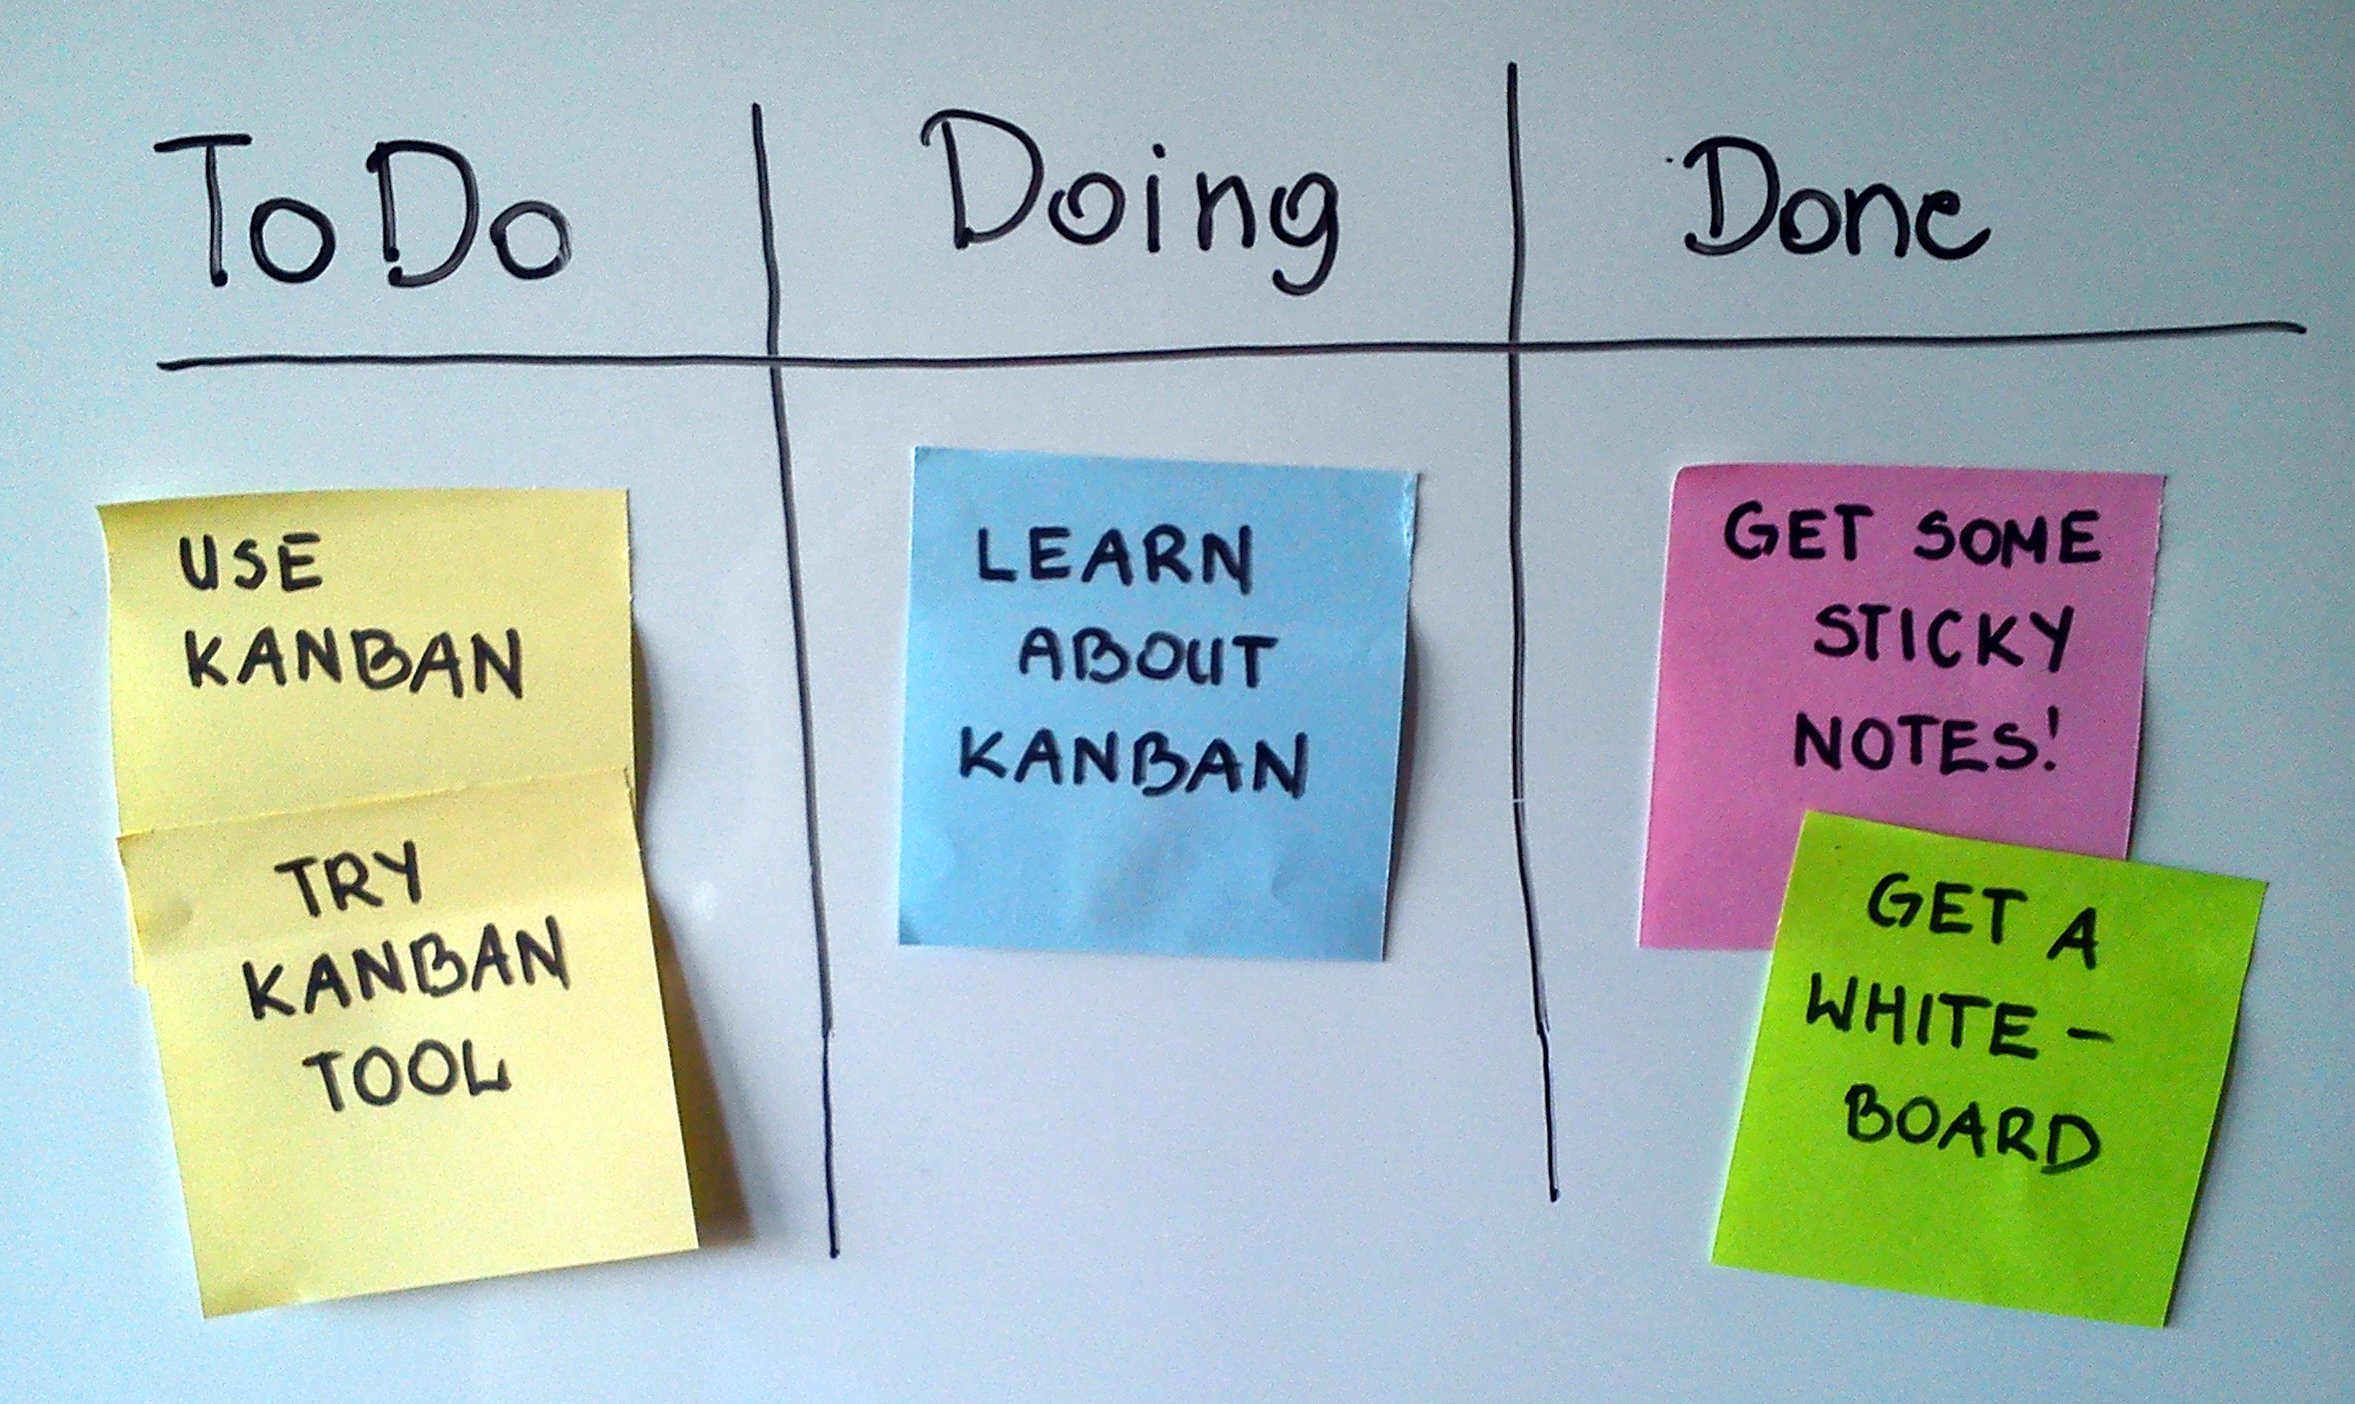 Example of a Kanban board